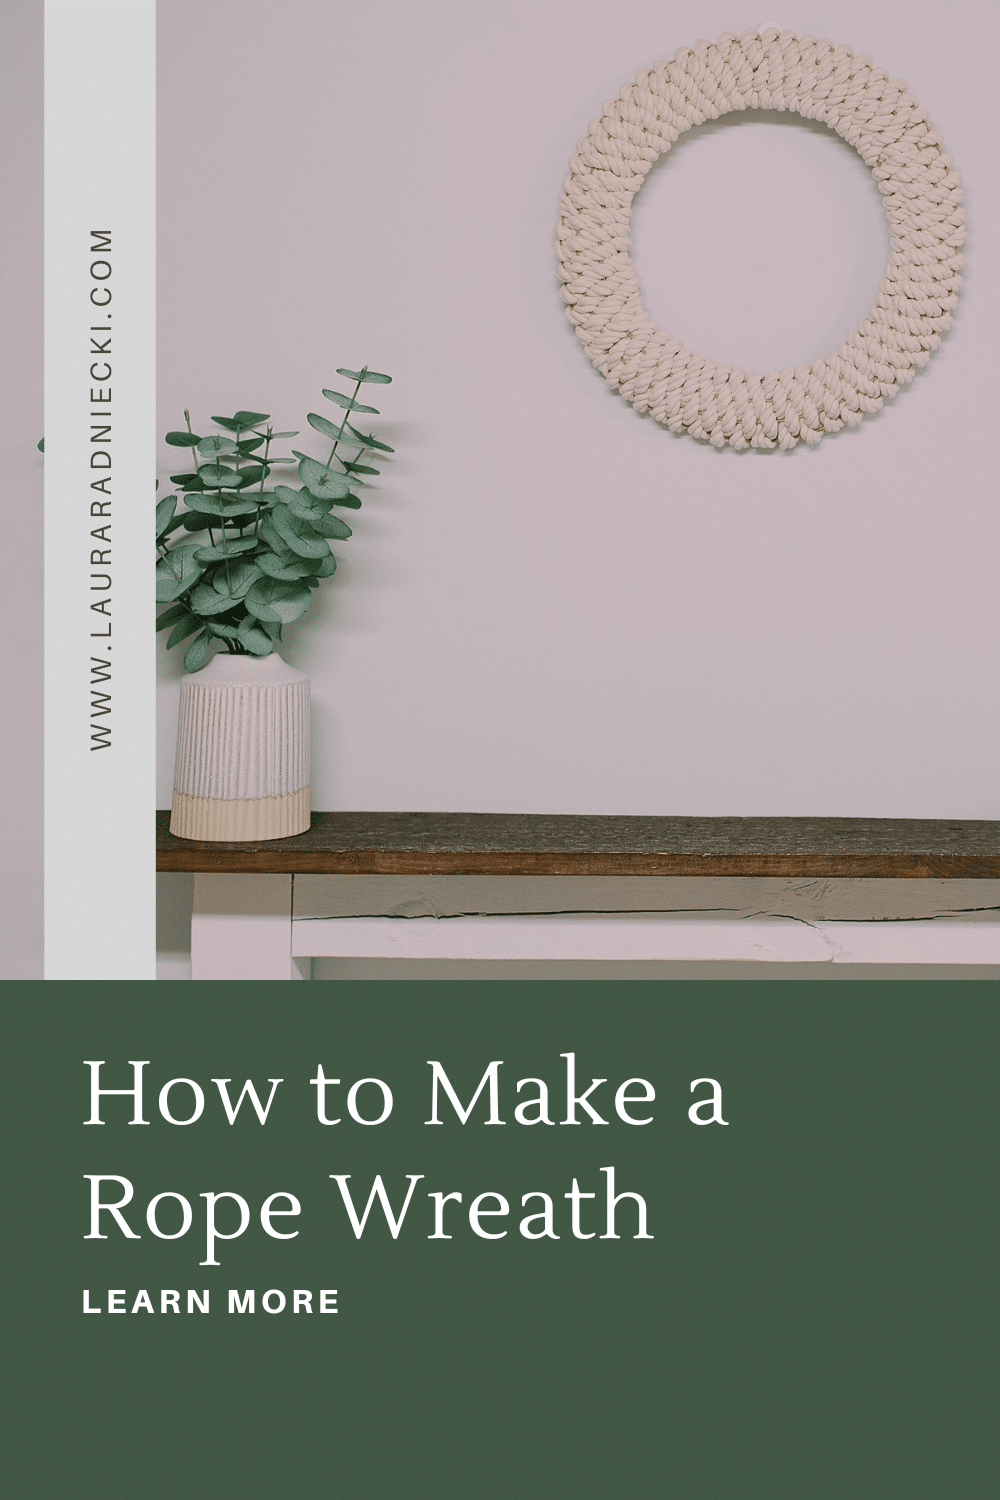 How to make a rope wreath using cotton rope from the Dollar Tree